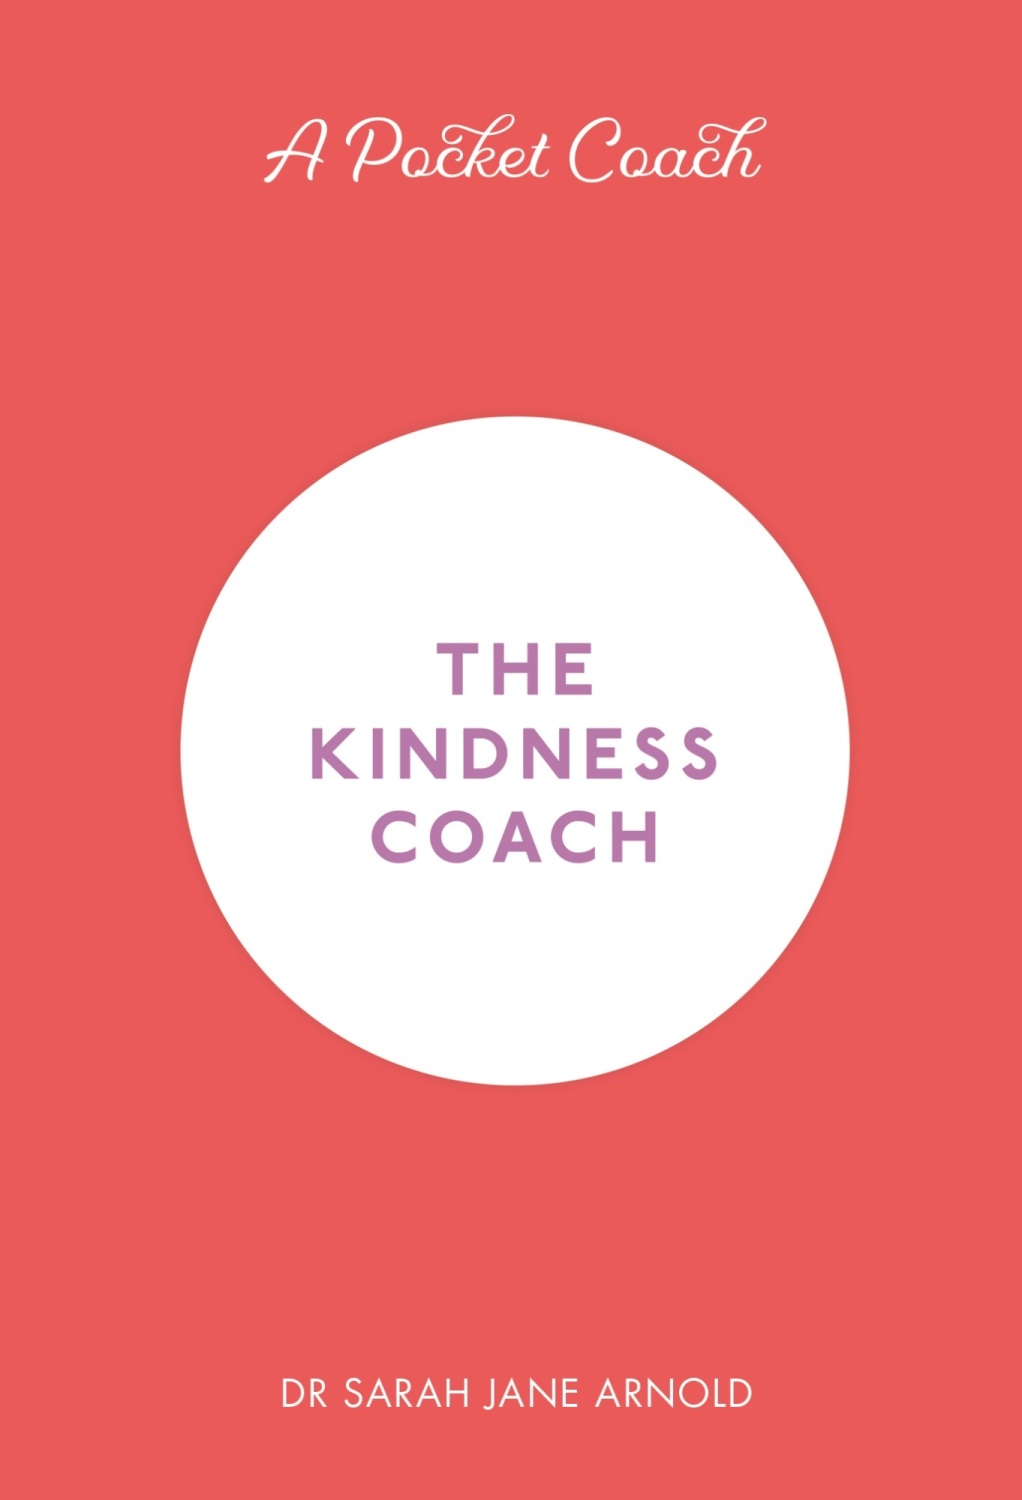 THE KINDNESS COACH